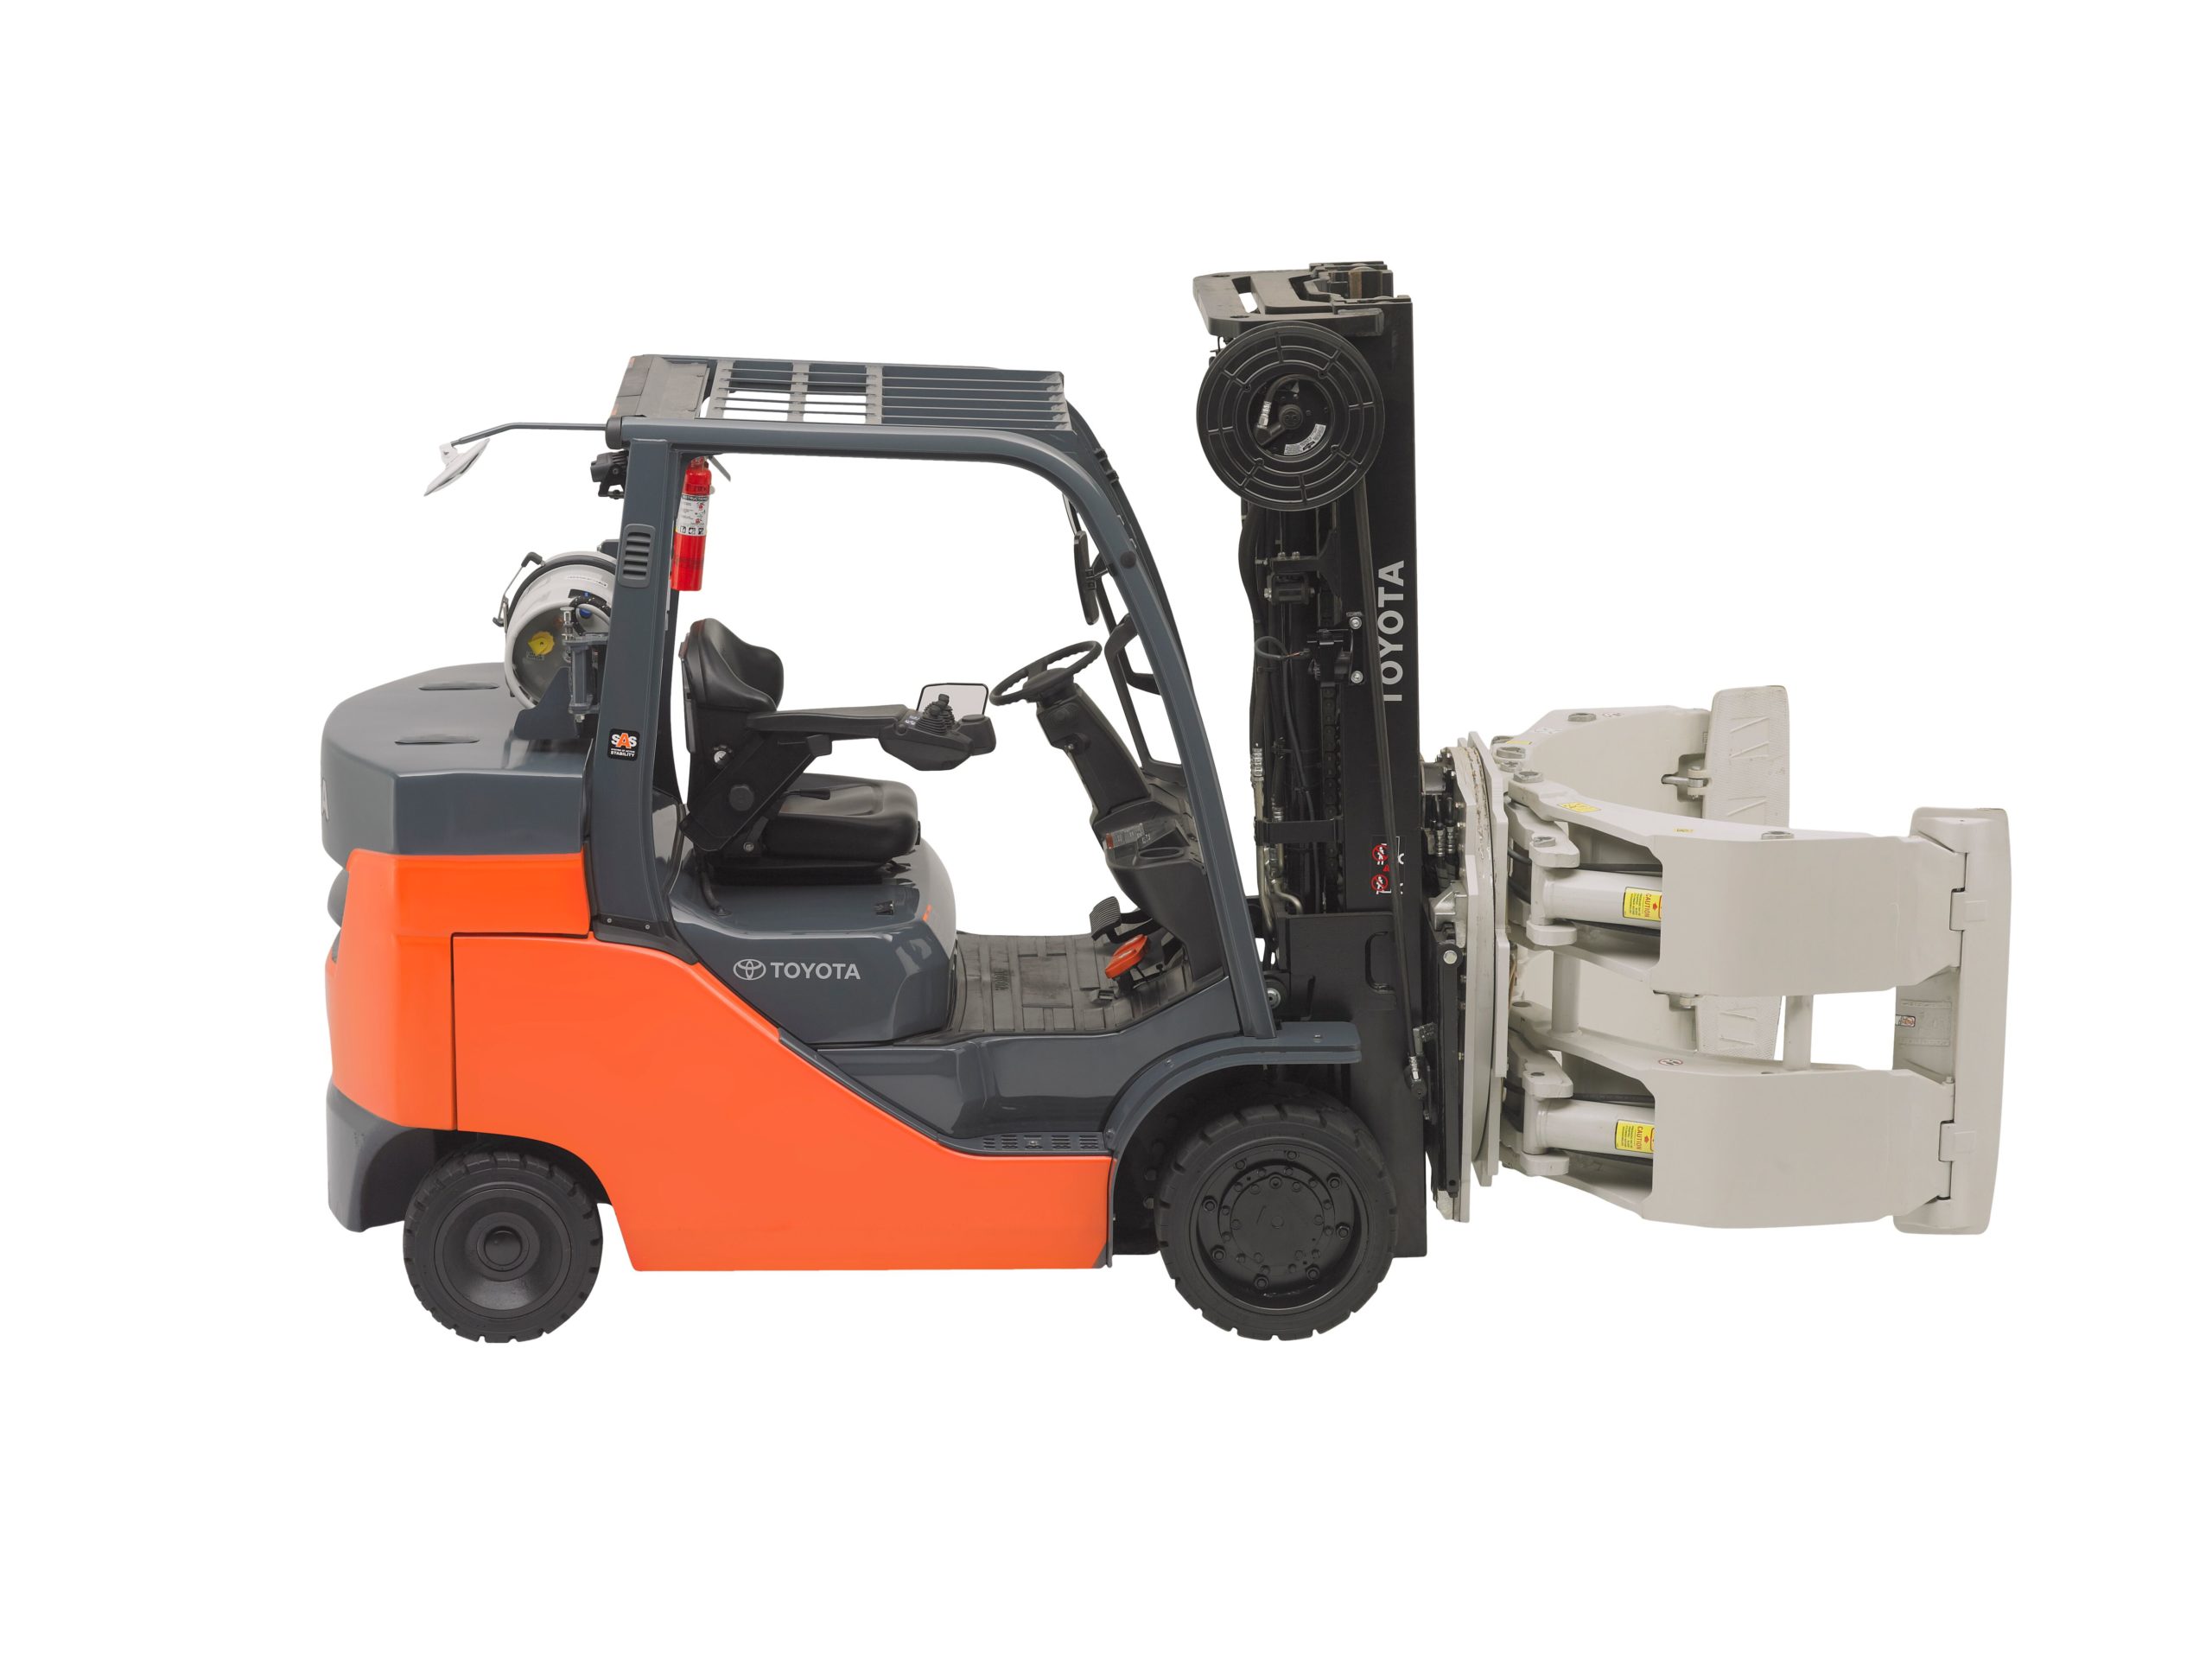 Toyota Paper Roll Forklift